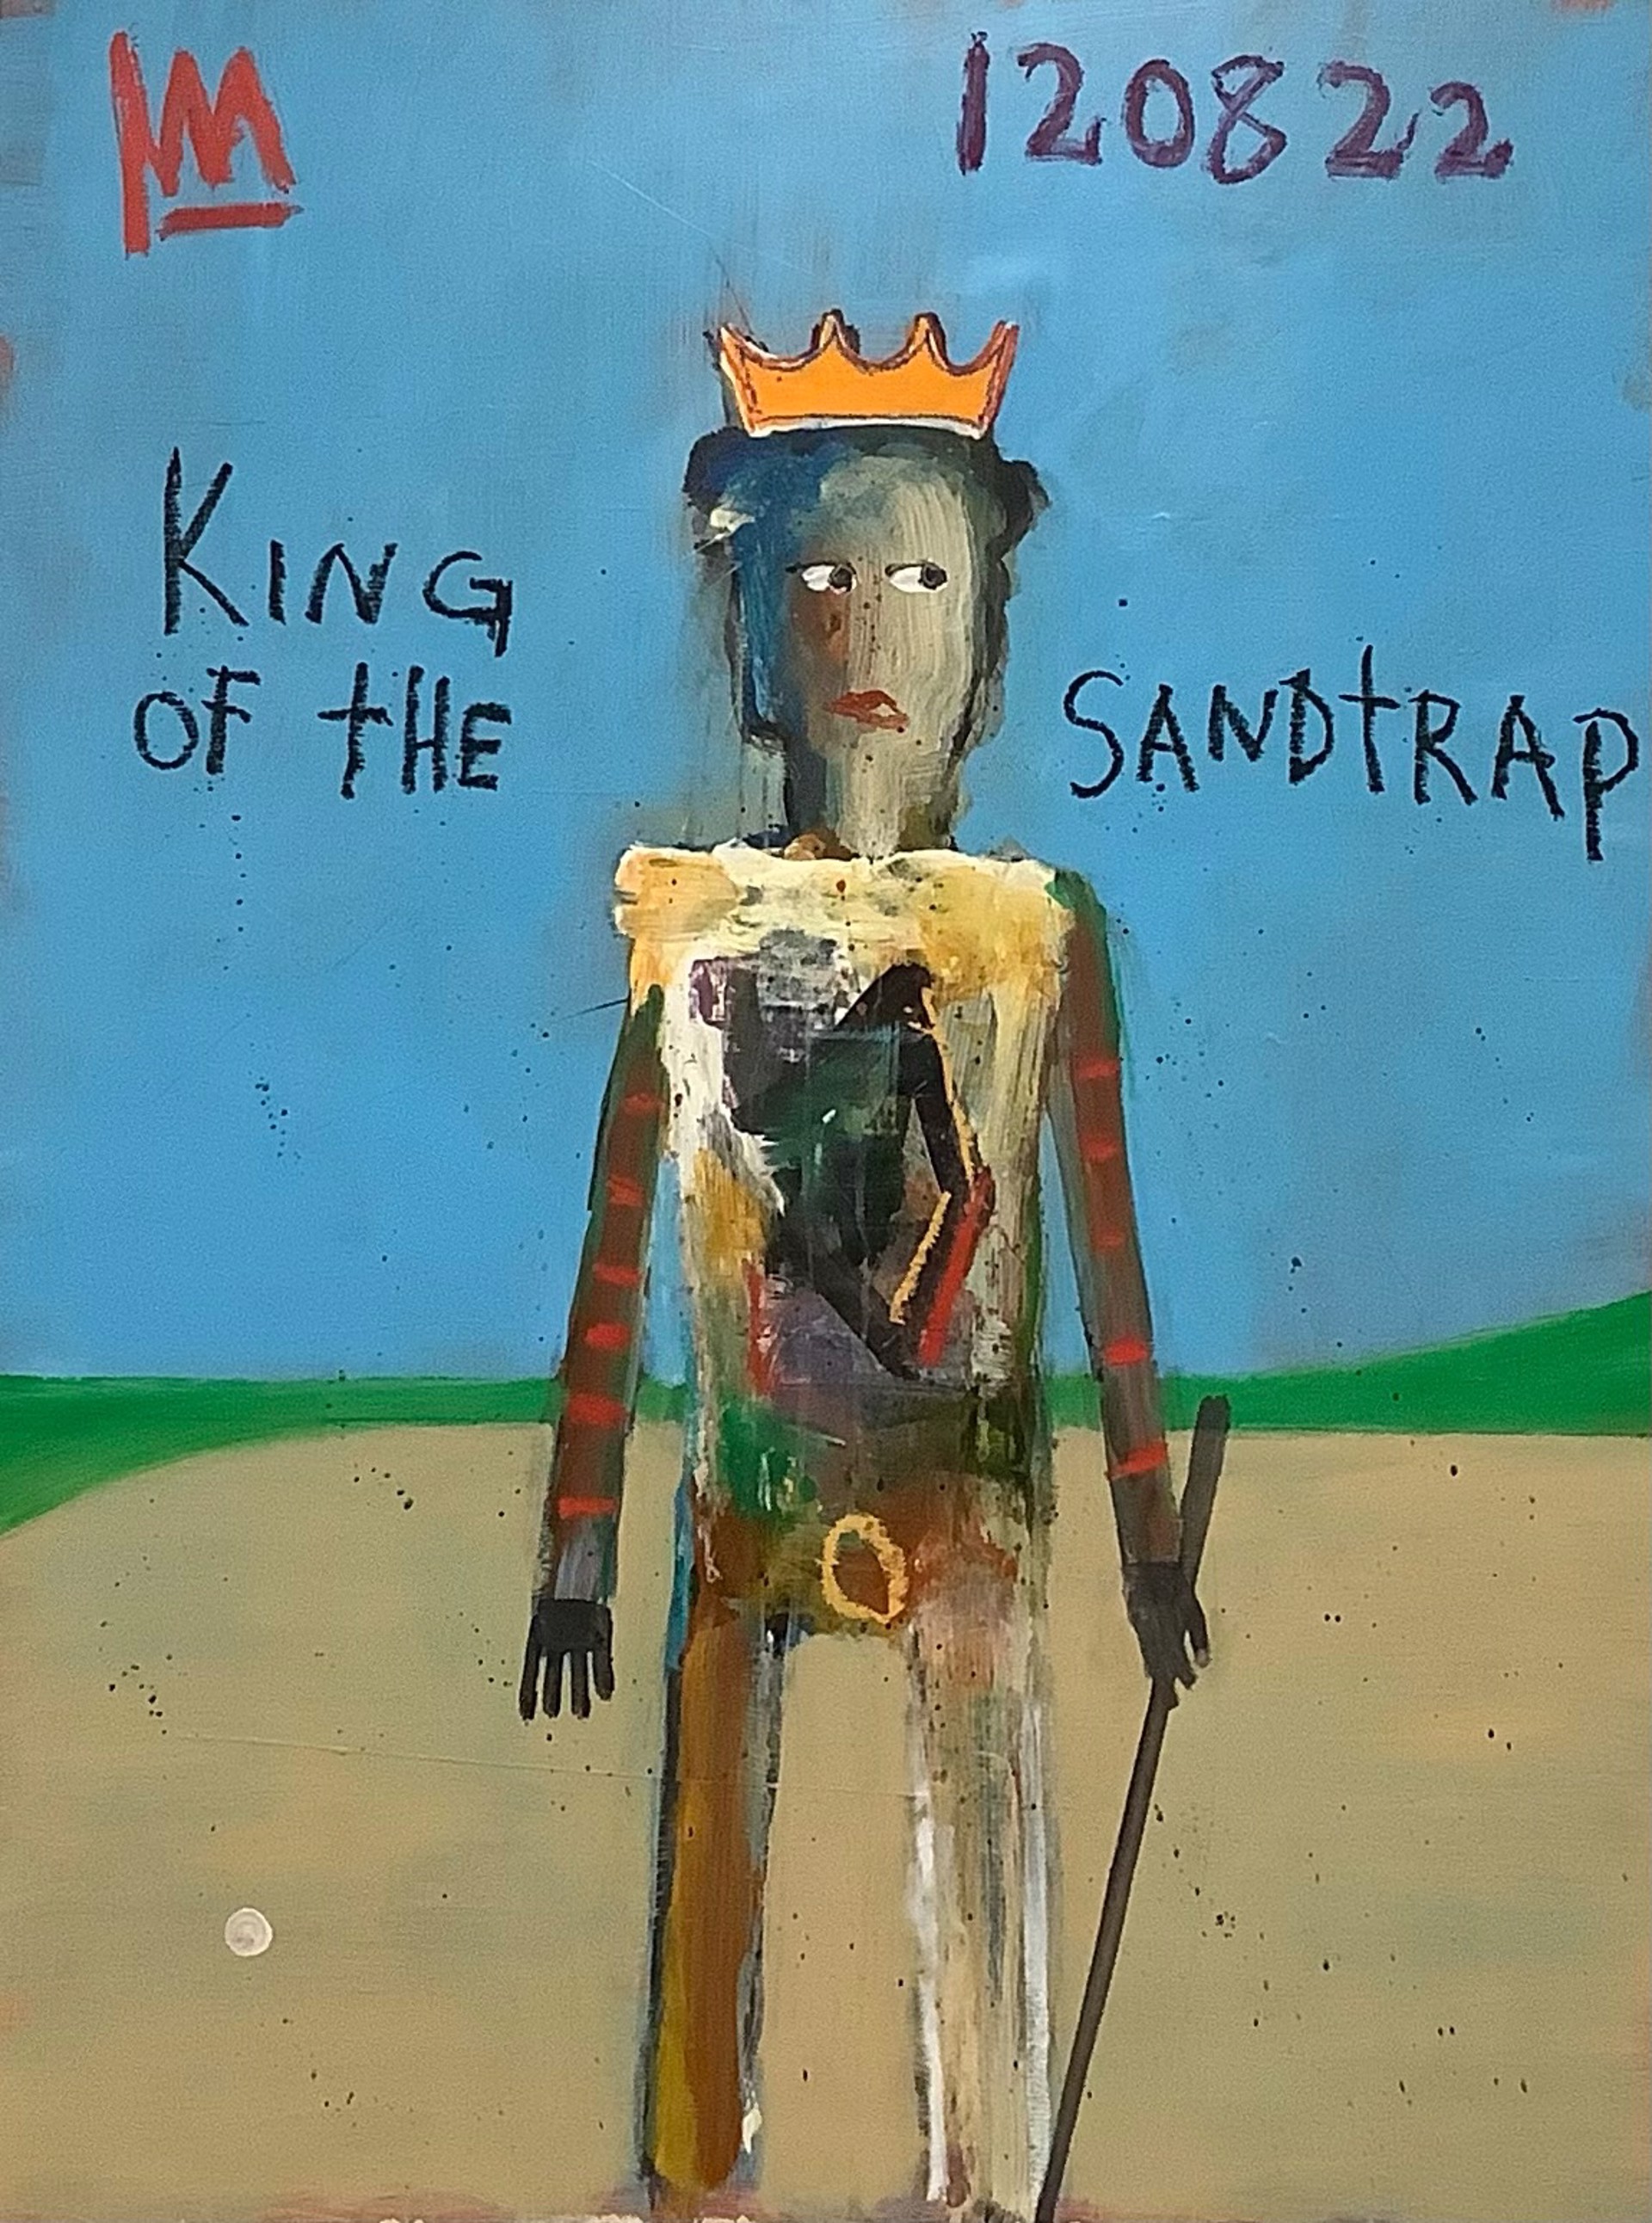 King of the Sandtrap by Michael Snodgrass